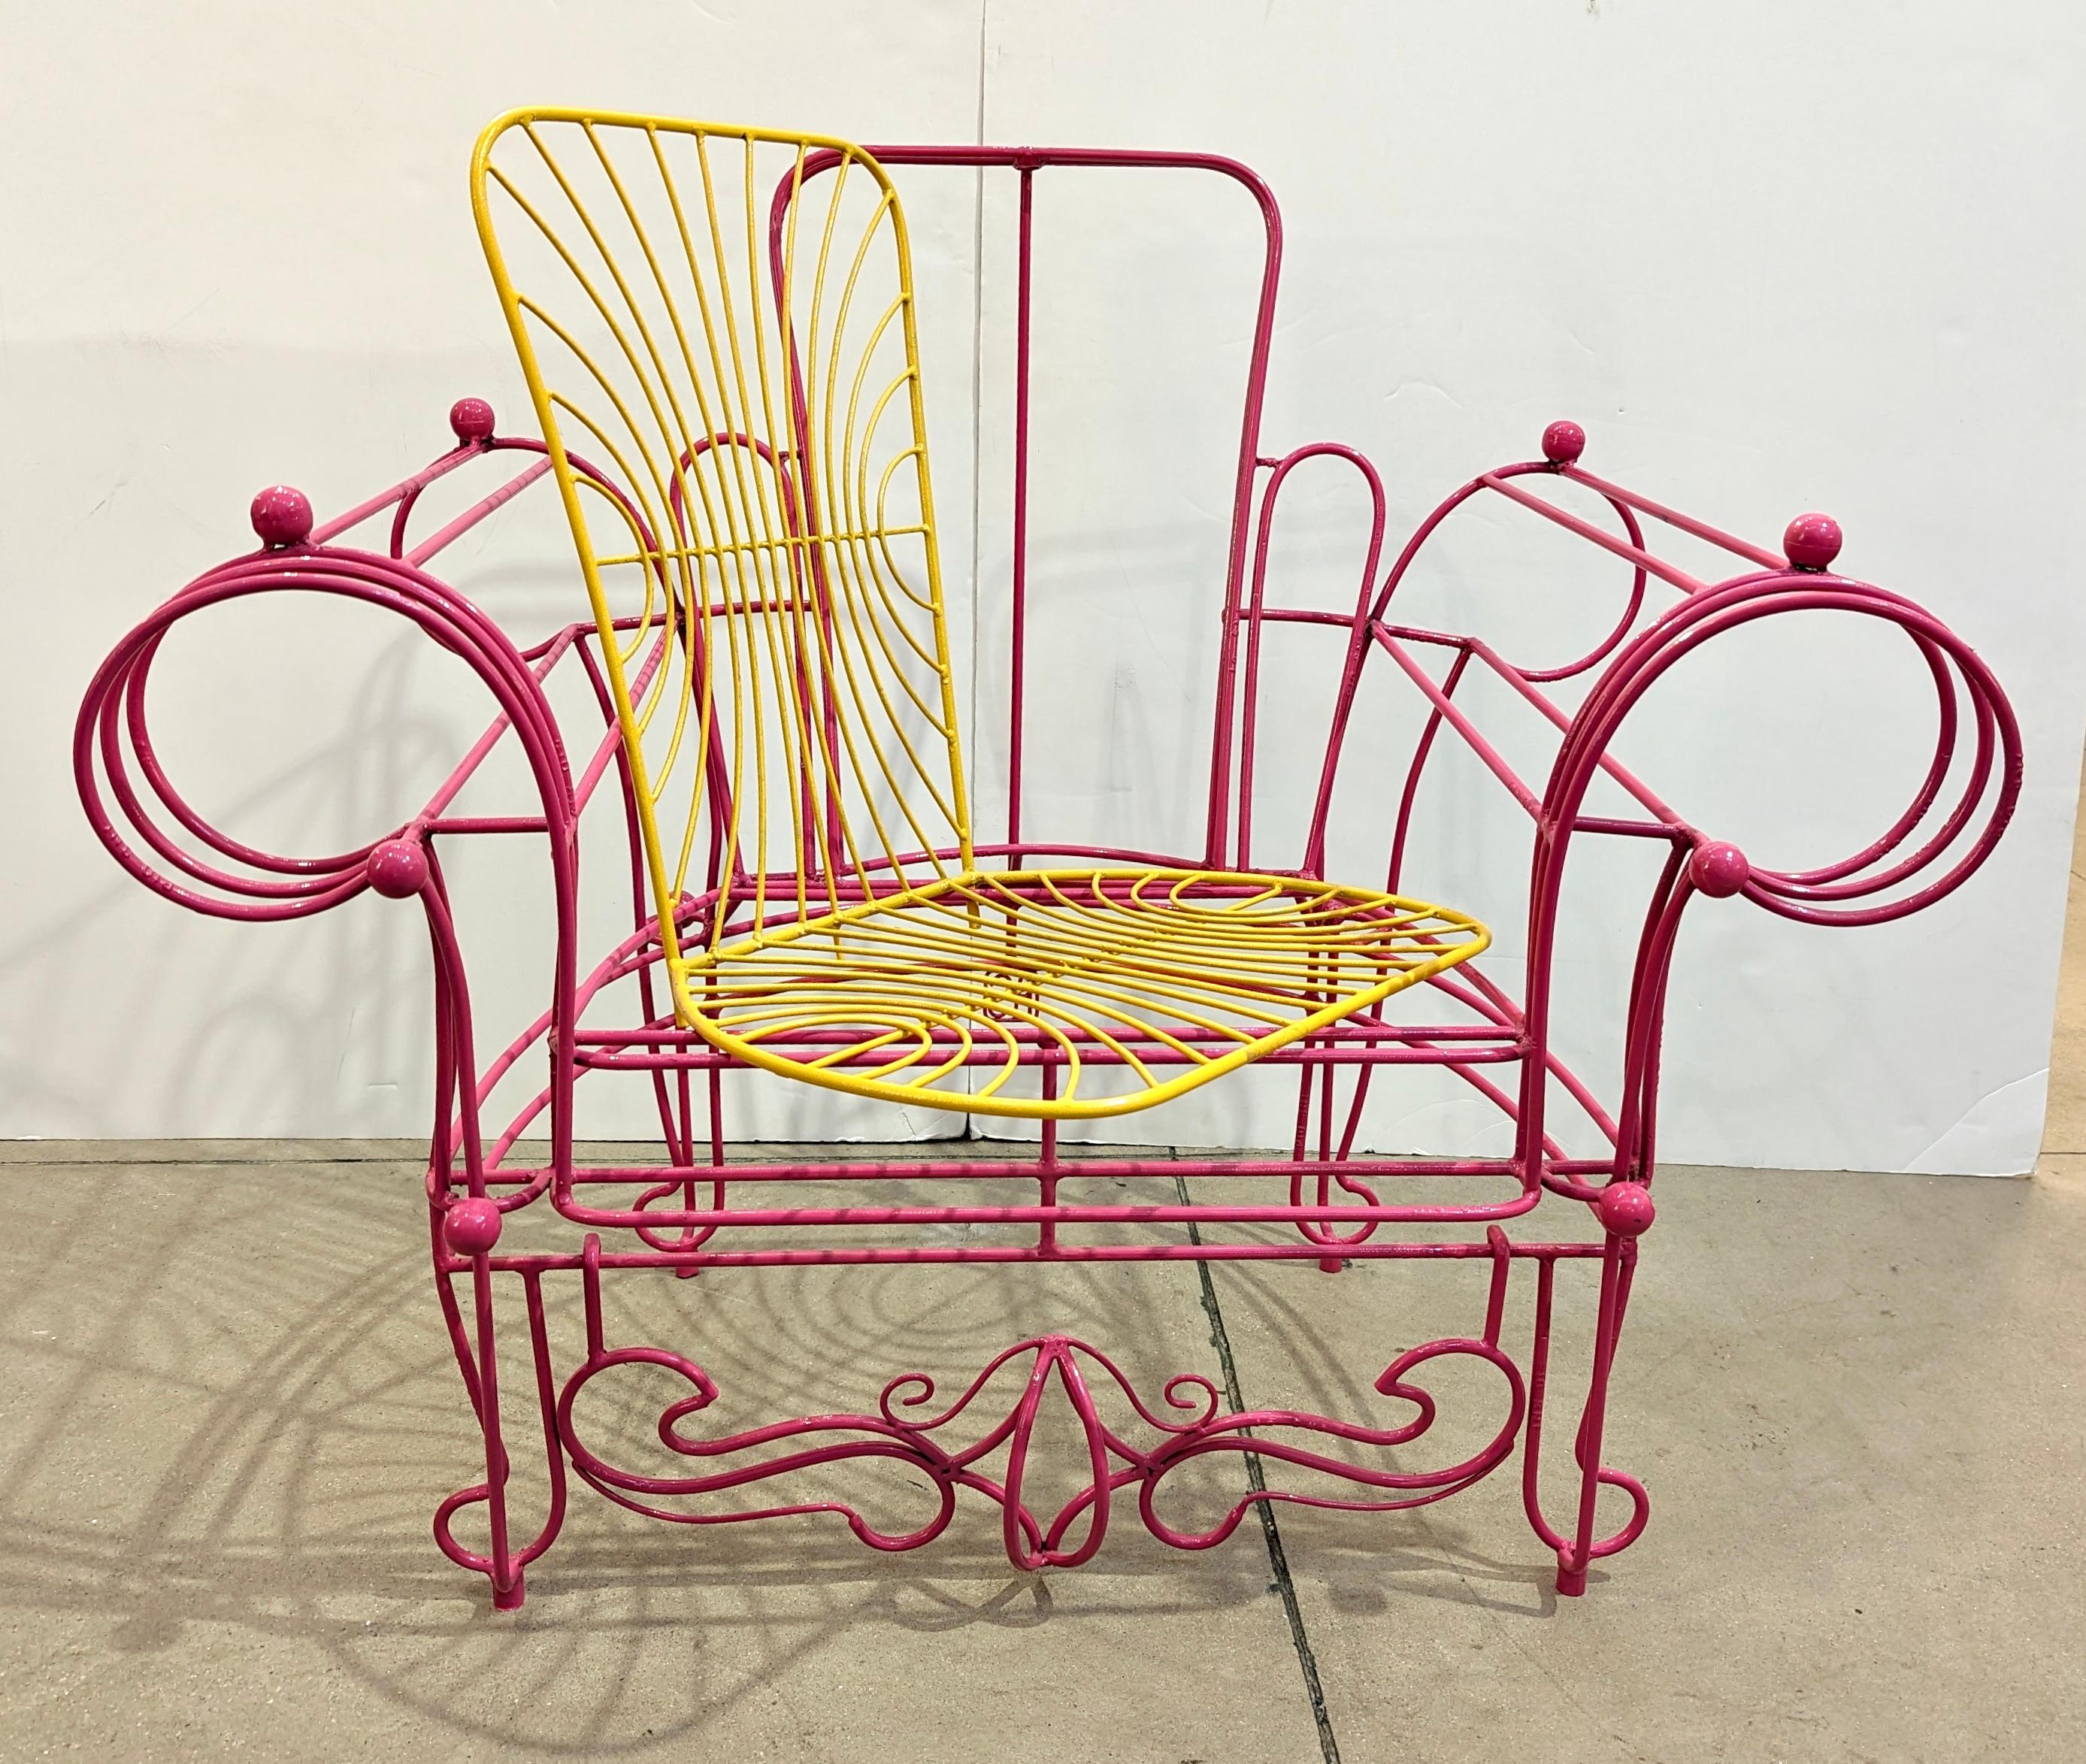 Post-Modern 1990s Spazzapan Italian Pop Art Pair of Pink Yellow Metal Armchairs Sculptures For Sale